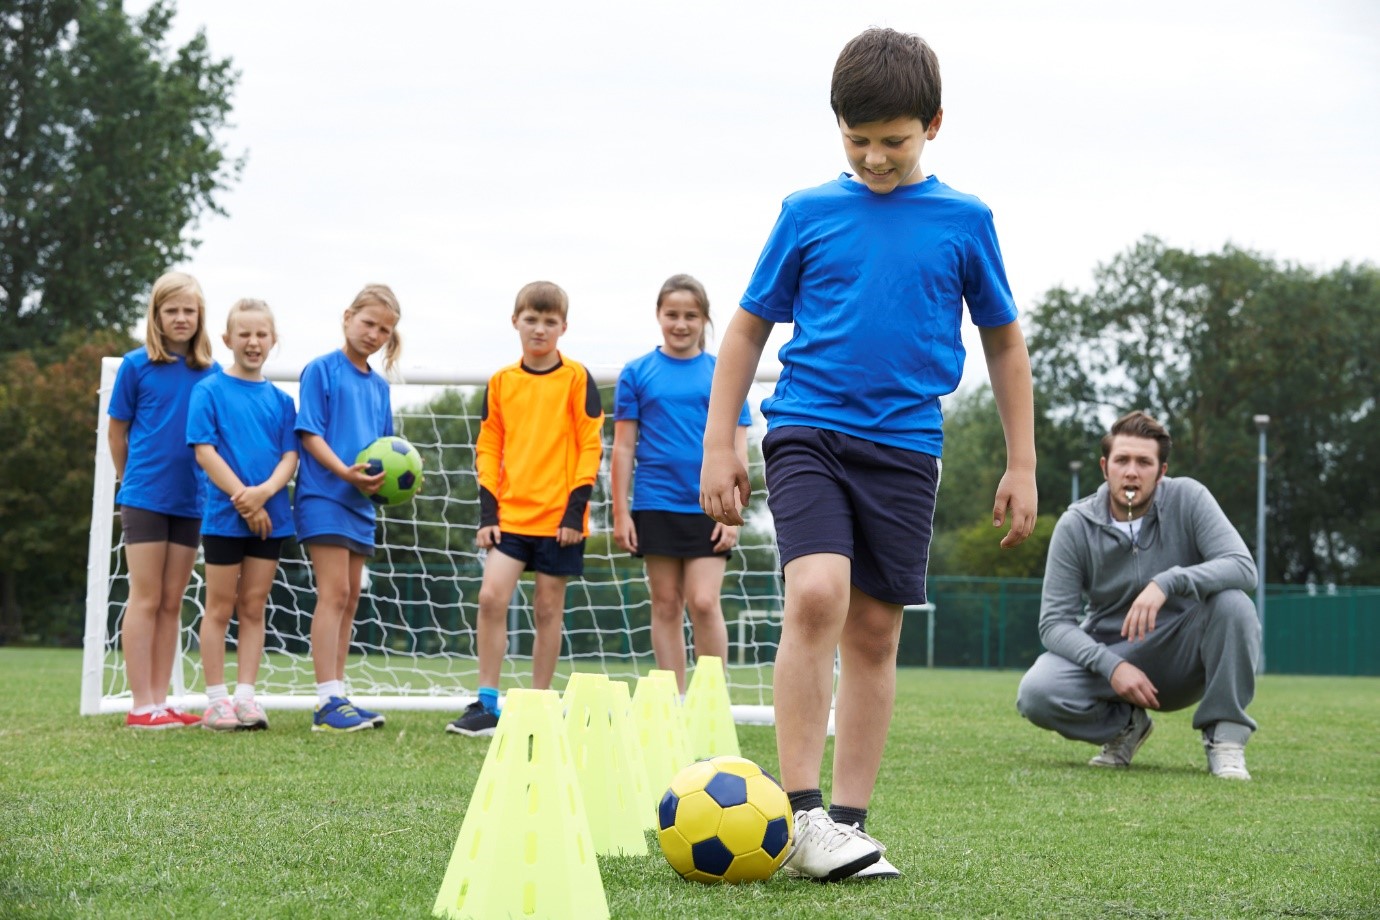 Four great ways sports clubs can benefit your children - Get